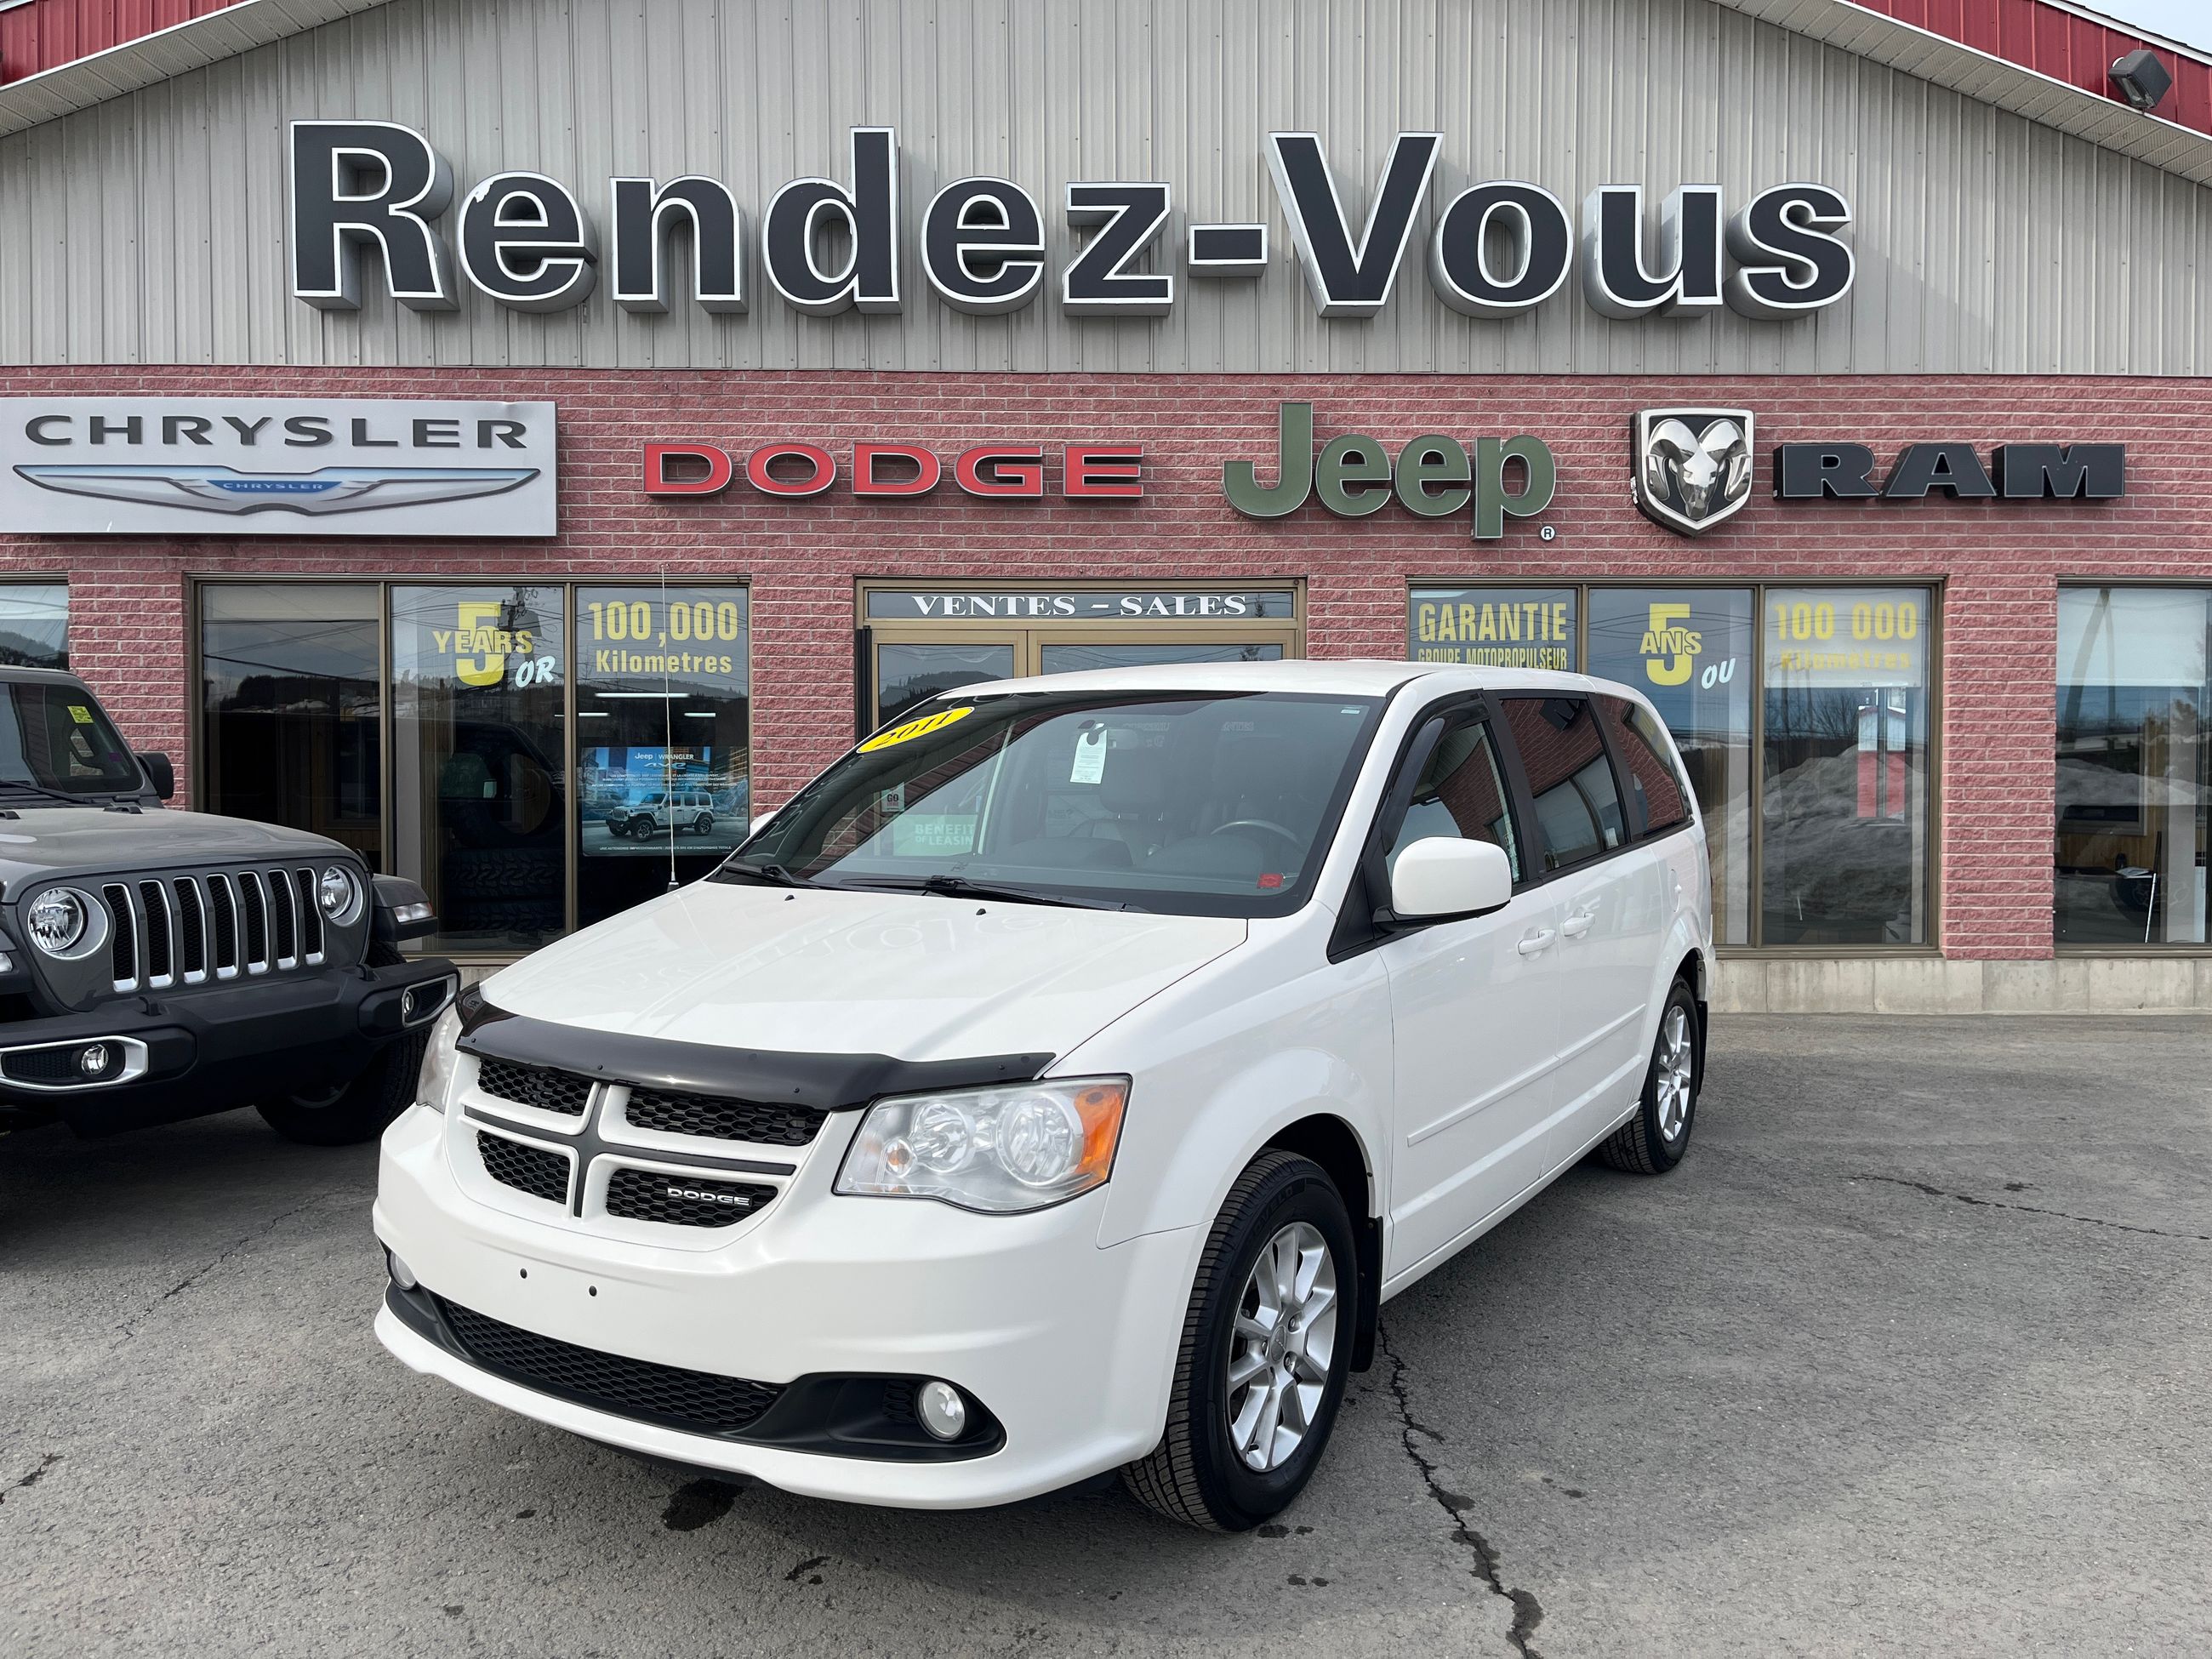 Rendez-vous Chrysler in Grand-Sault and Edmunston | &page=2 Used Vehicles